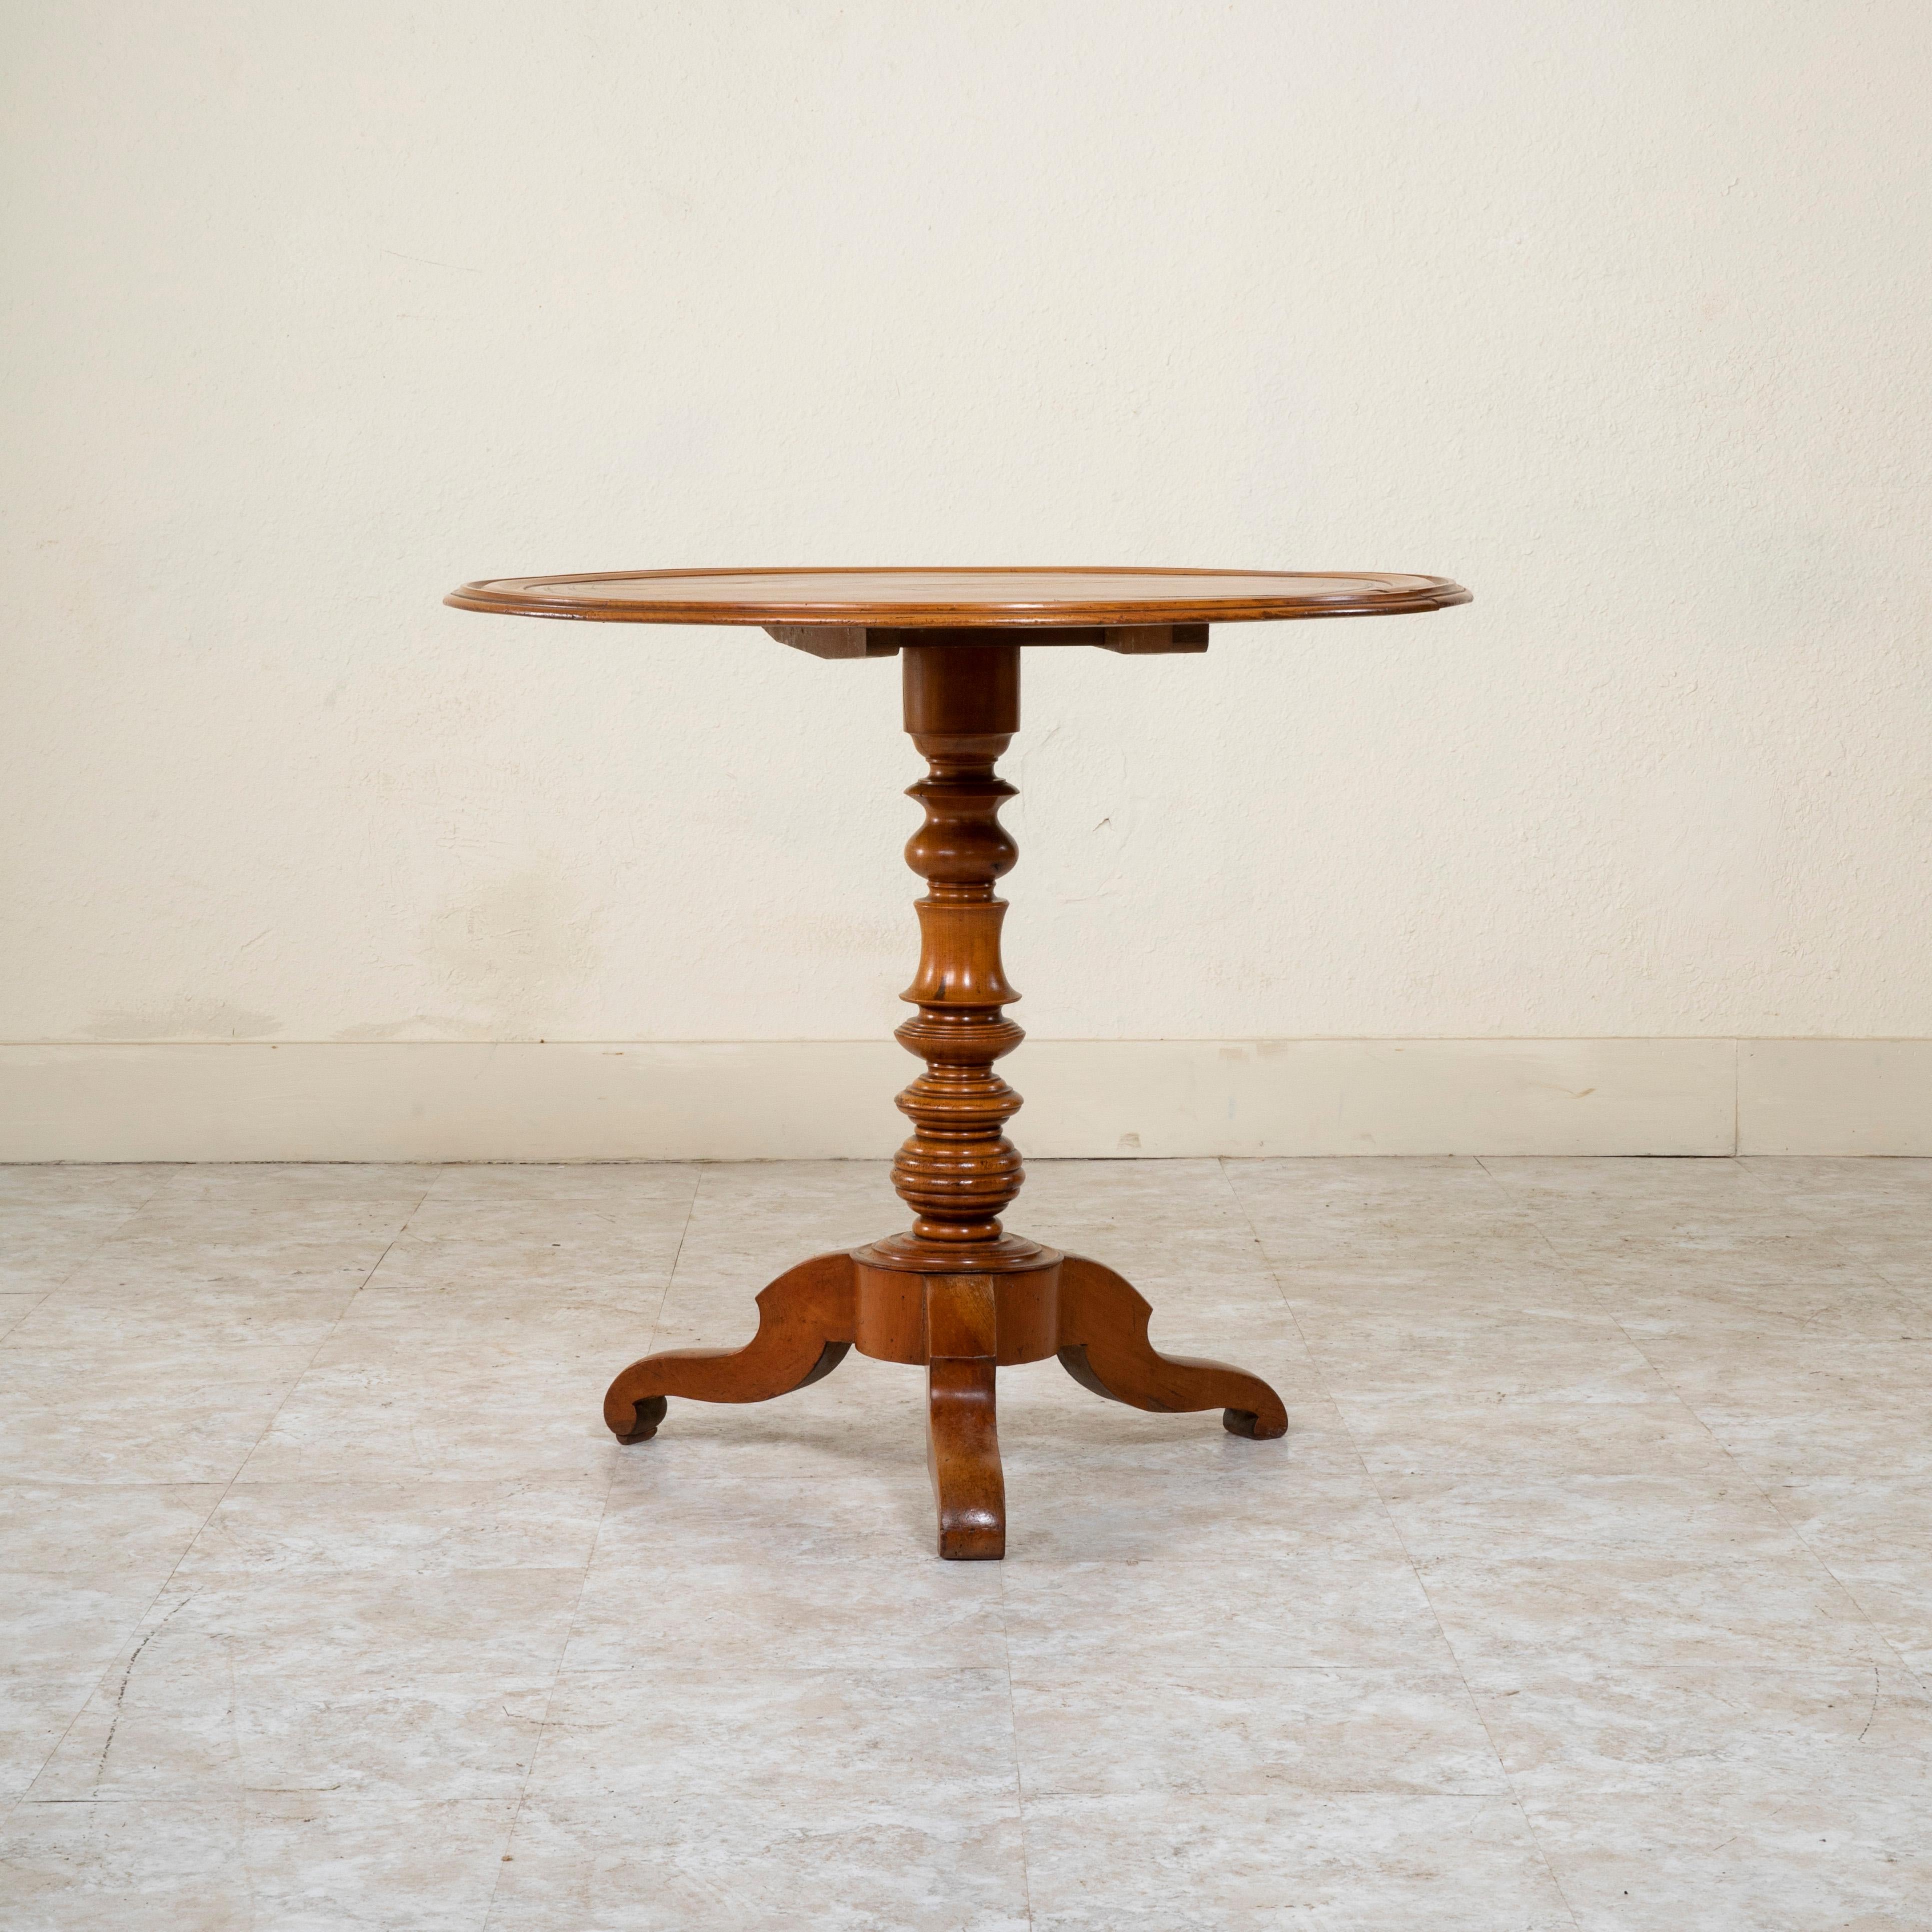 Beveled Mid-19th Century French Louis Philippe Period Walnut Gueridon or Pedestal Table For Sale